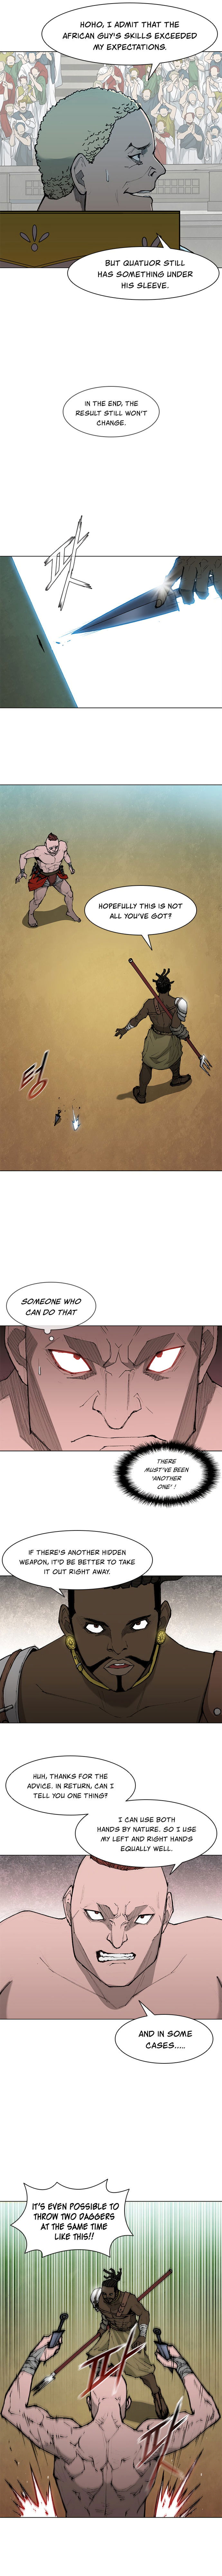 long-way-of-the-warrior-chap-37-1